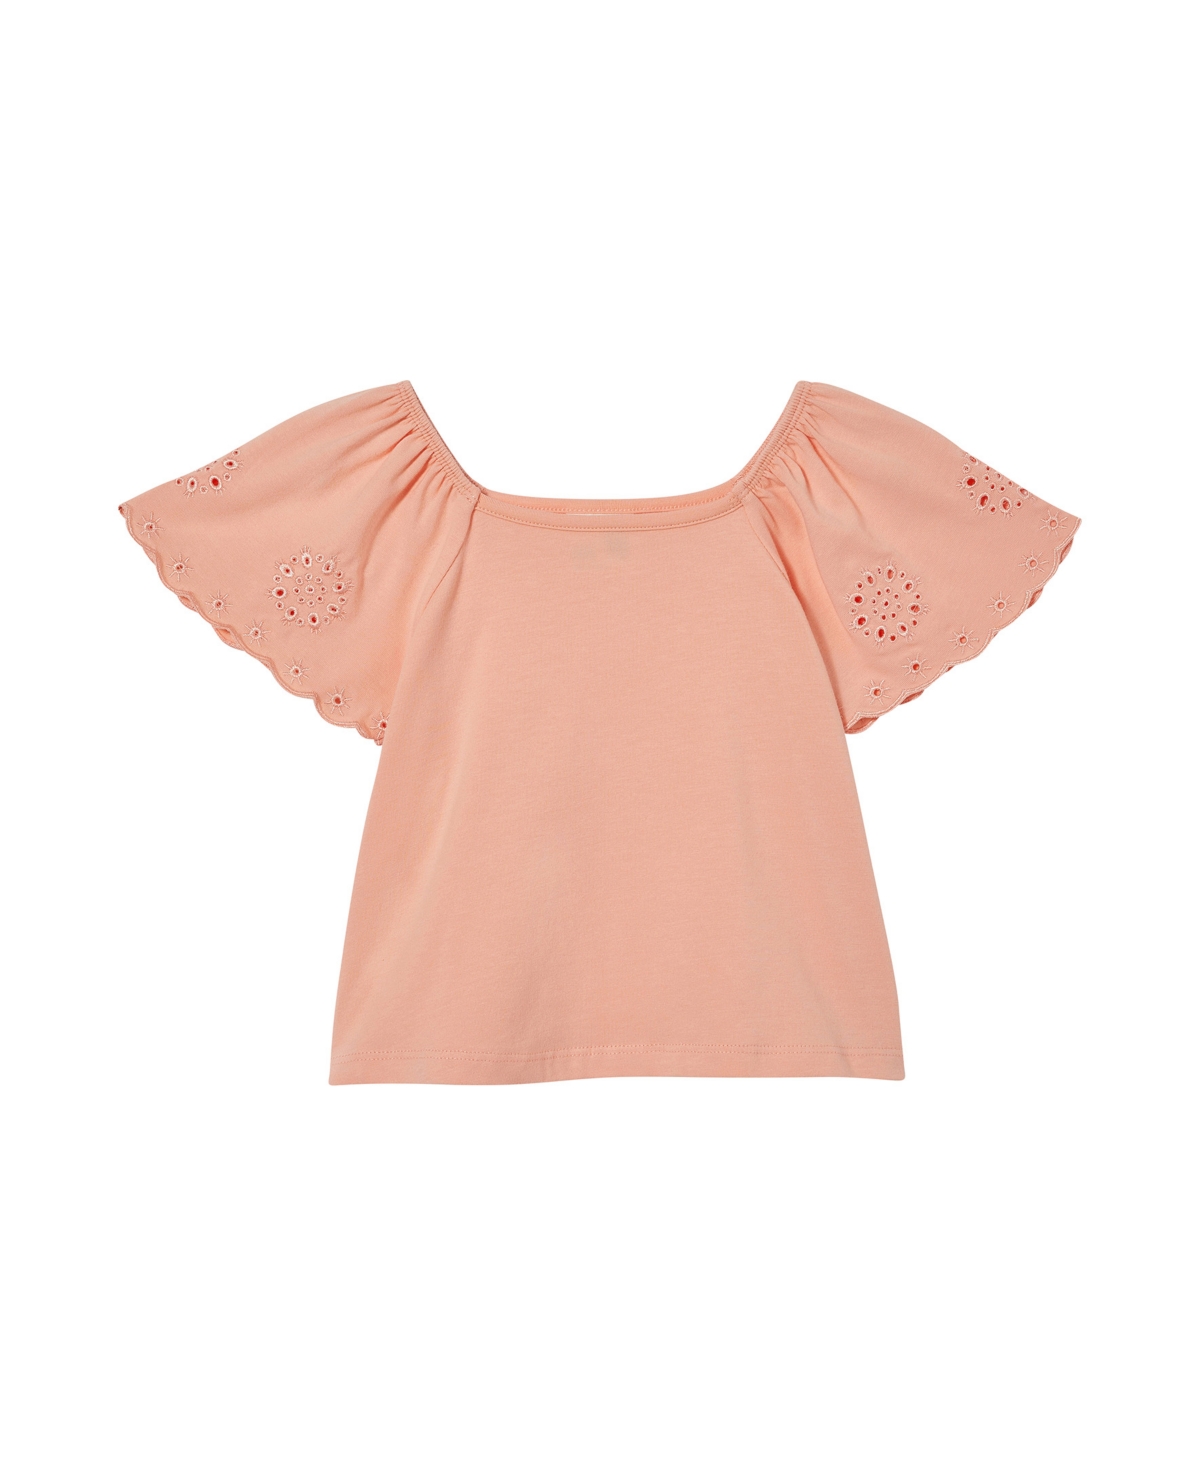 Cotton On Babies' Toddler Girls Ava Short Sleeve Top In Tropical Orange